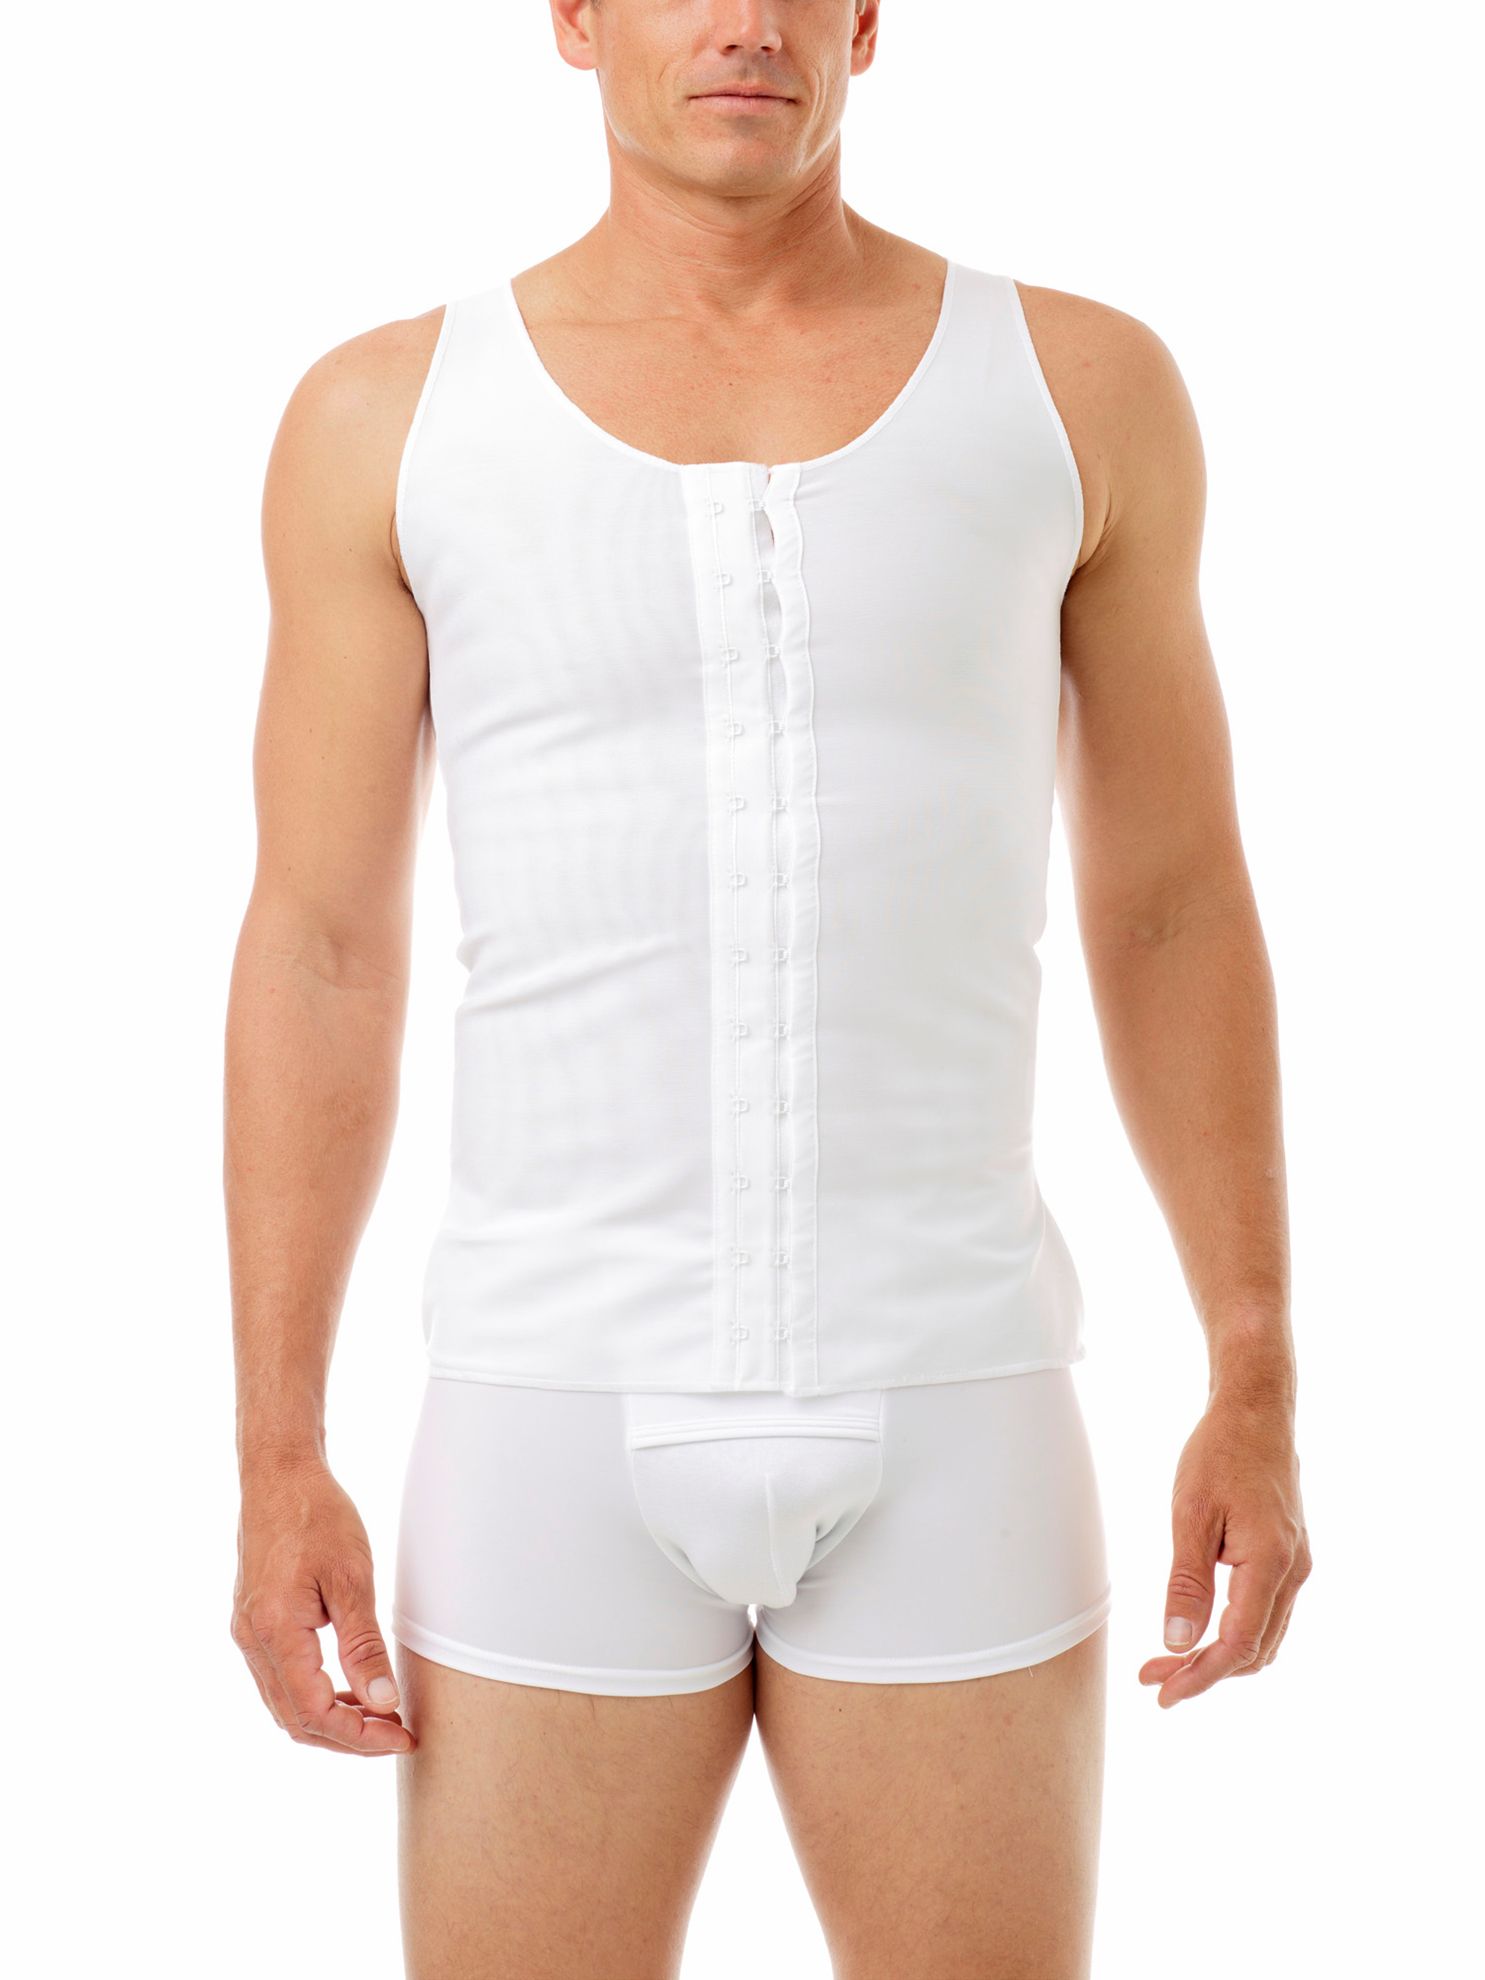 Power Compression Post Surgical Vest. Men Compression Shirts, Girdles,  Chest Binders, Hernia Garments